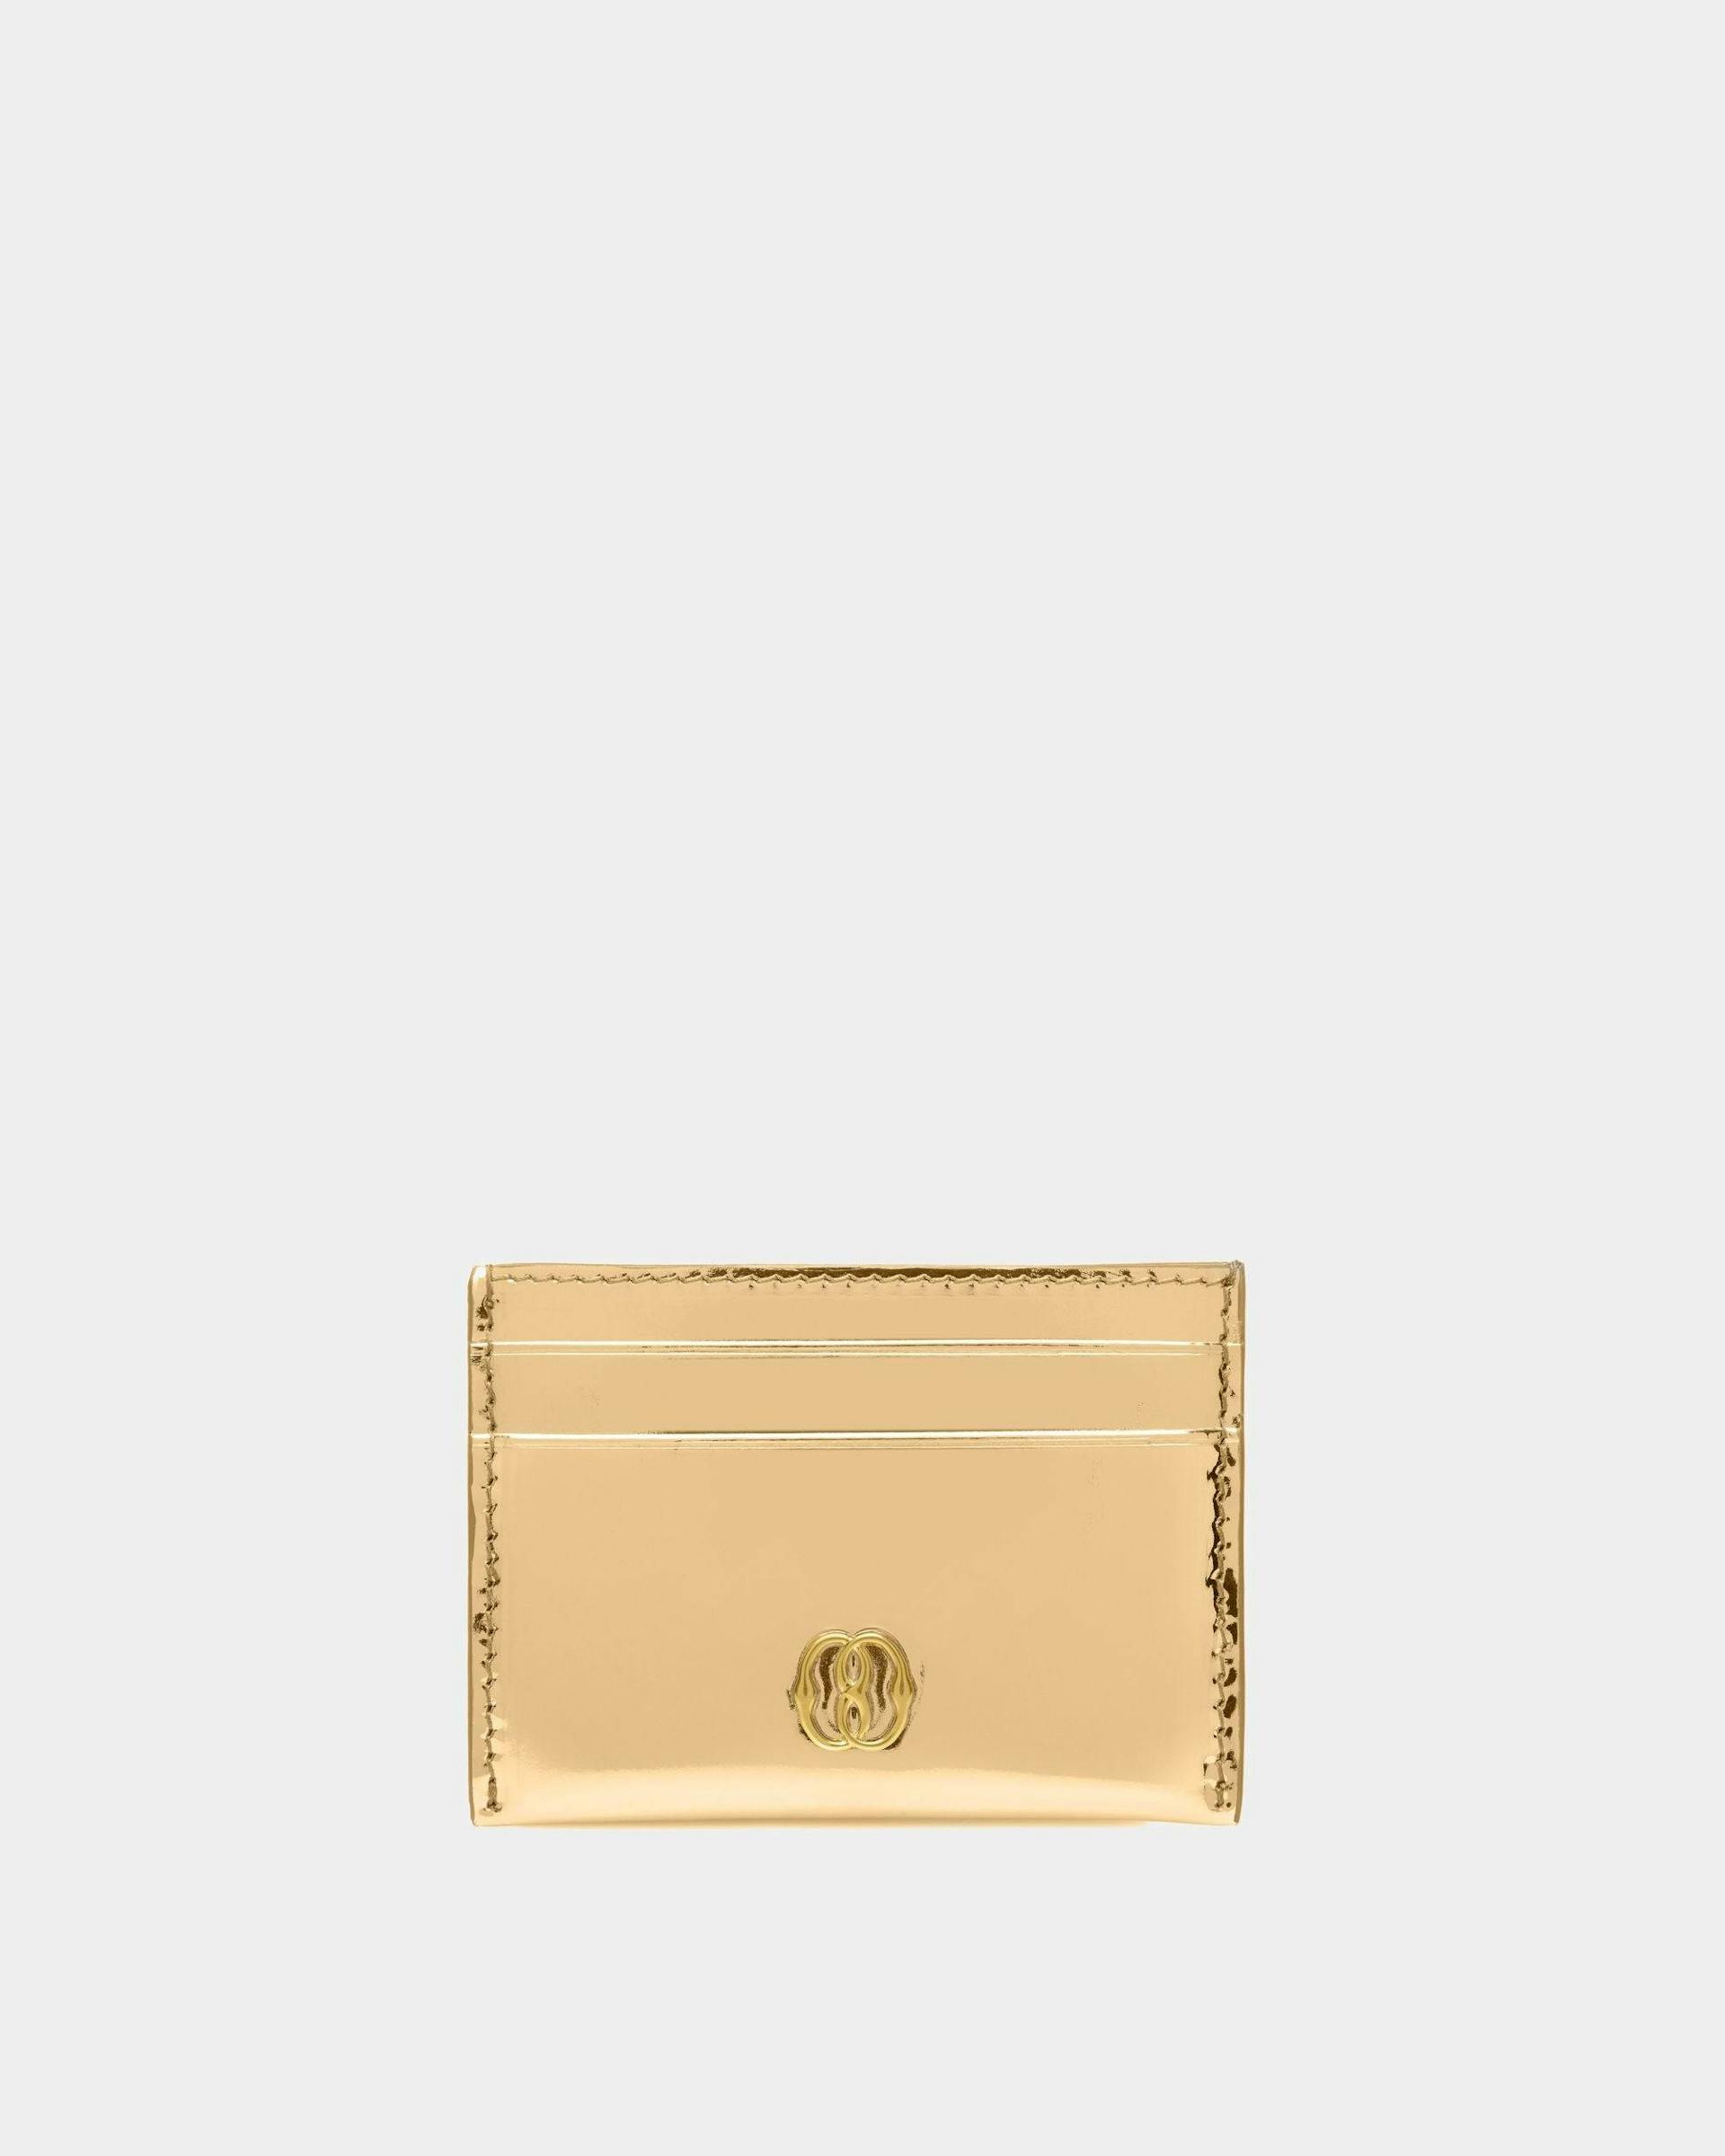 Emblem Business Card Holder In Gold Leather - Women's - Bally - 01